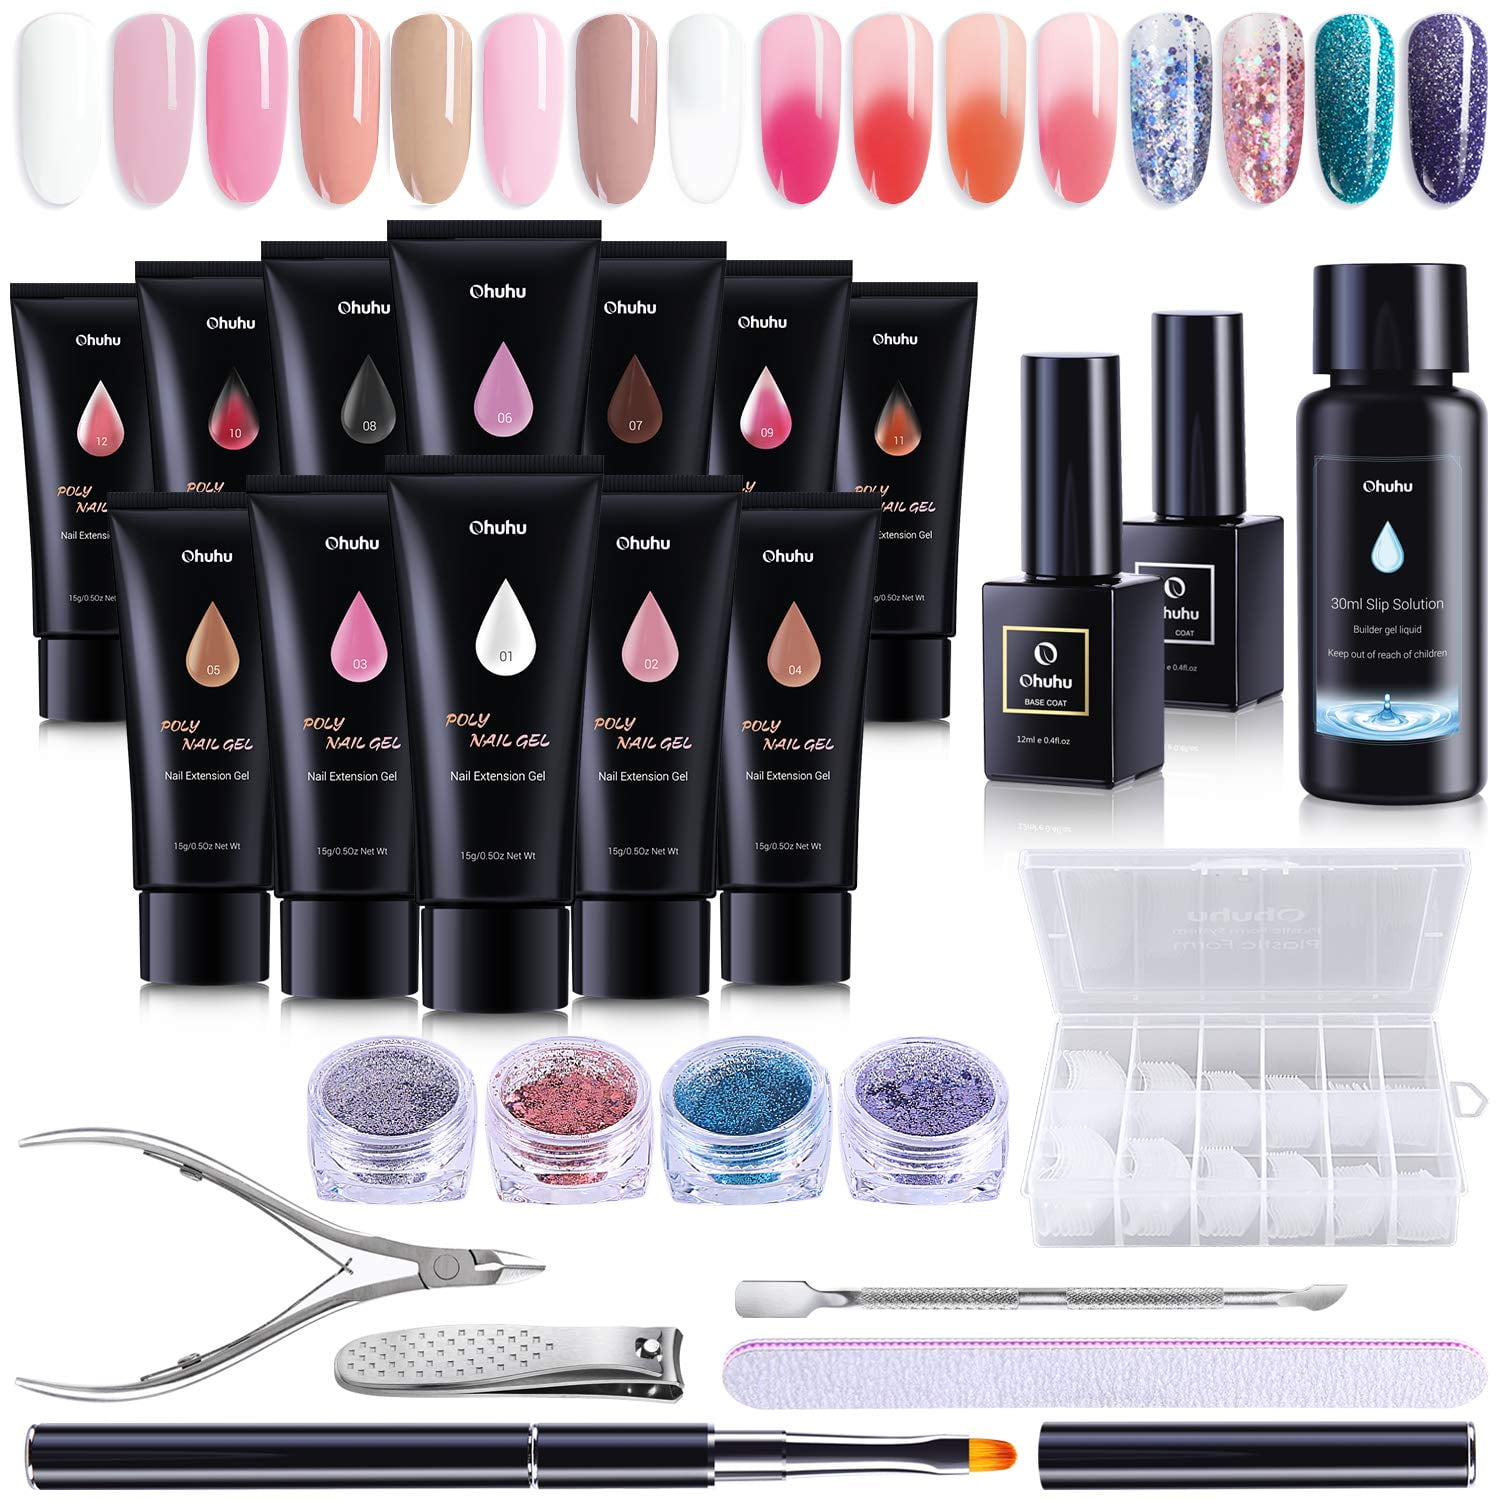 Poly Nail Gel Kit, 12 Colors Nail Gel Kit Enhancement Builder with 4 Temperature Color Changing Extension, 8 Regular Color Nail Extension Professional Kit - Walmart.com